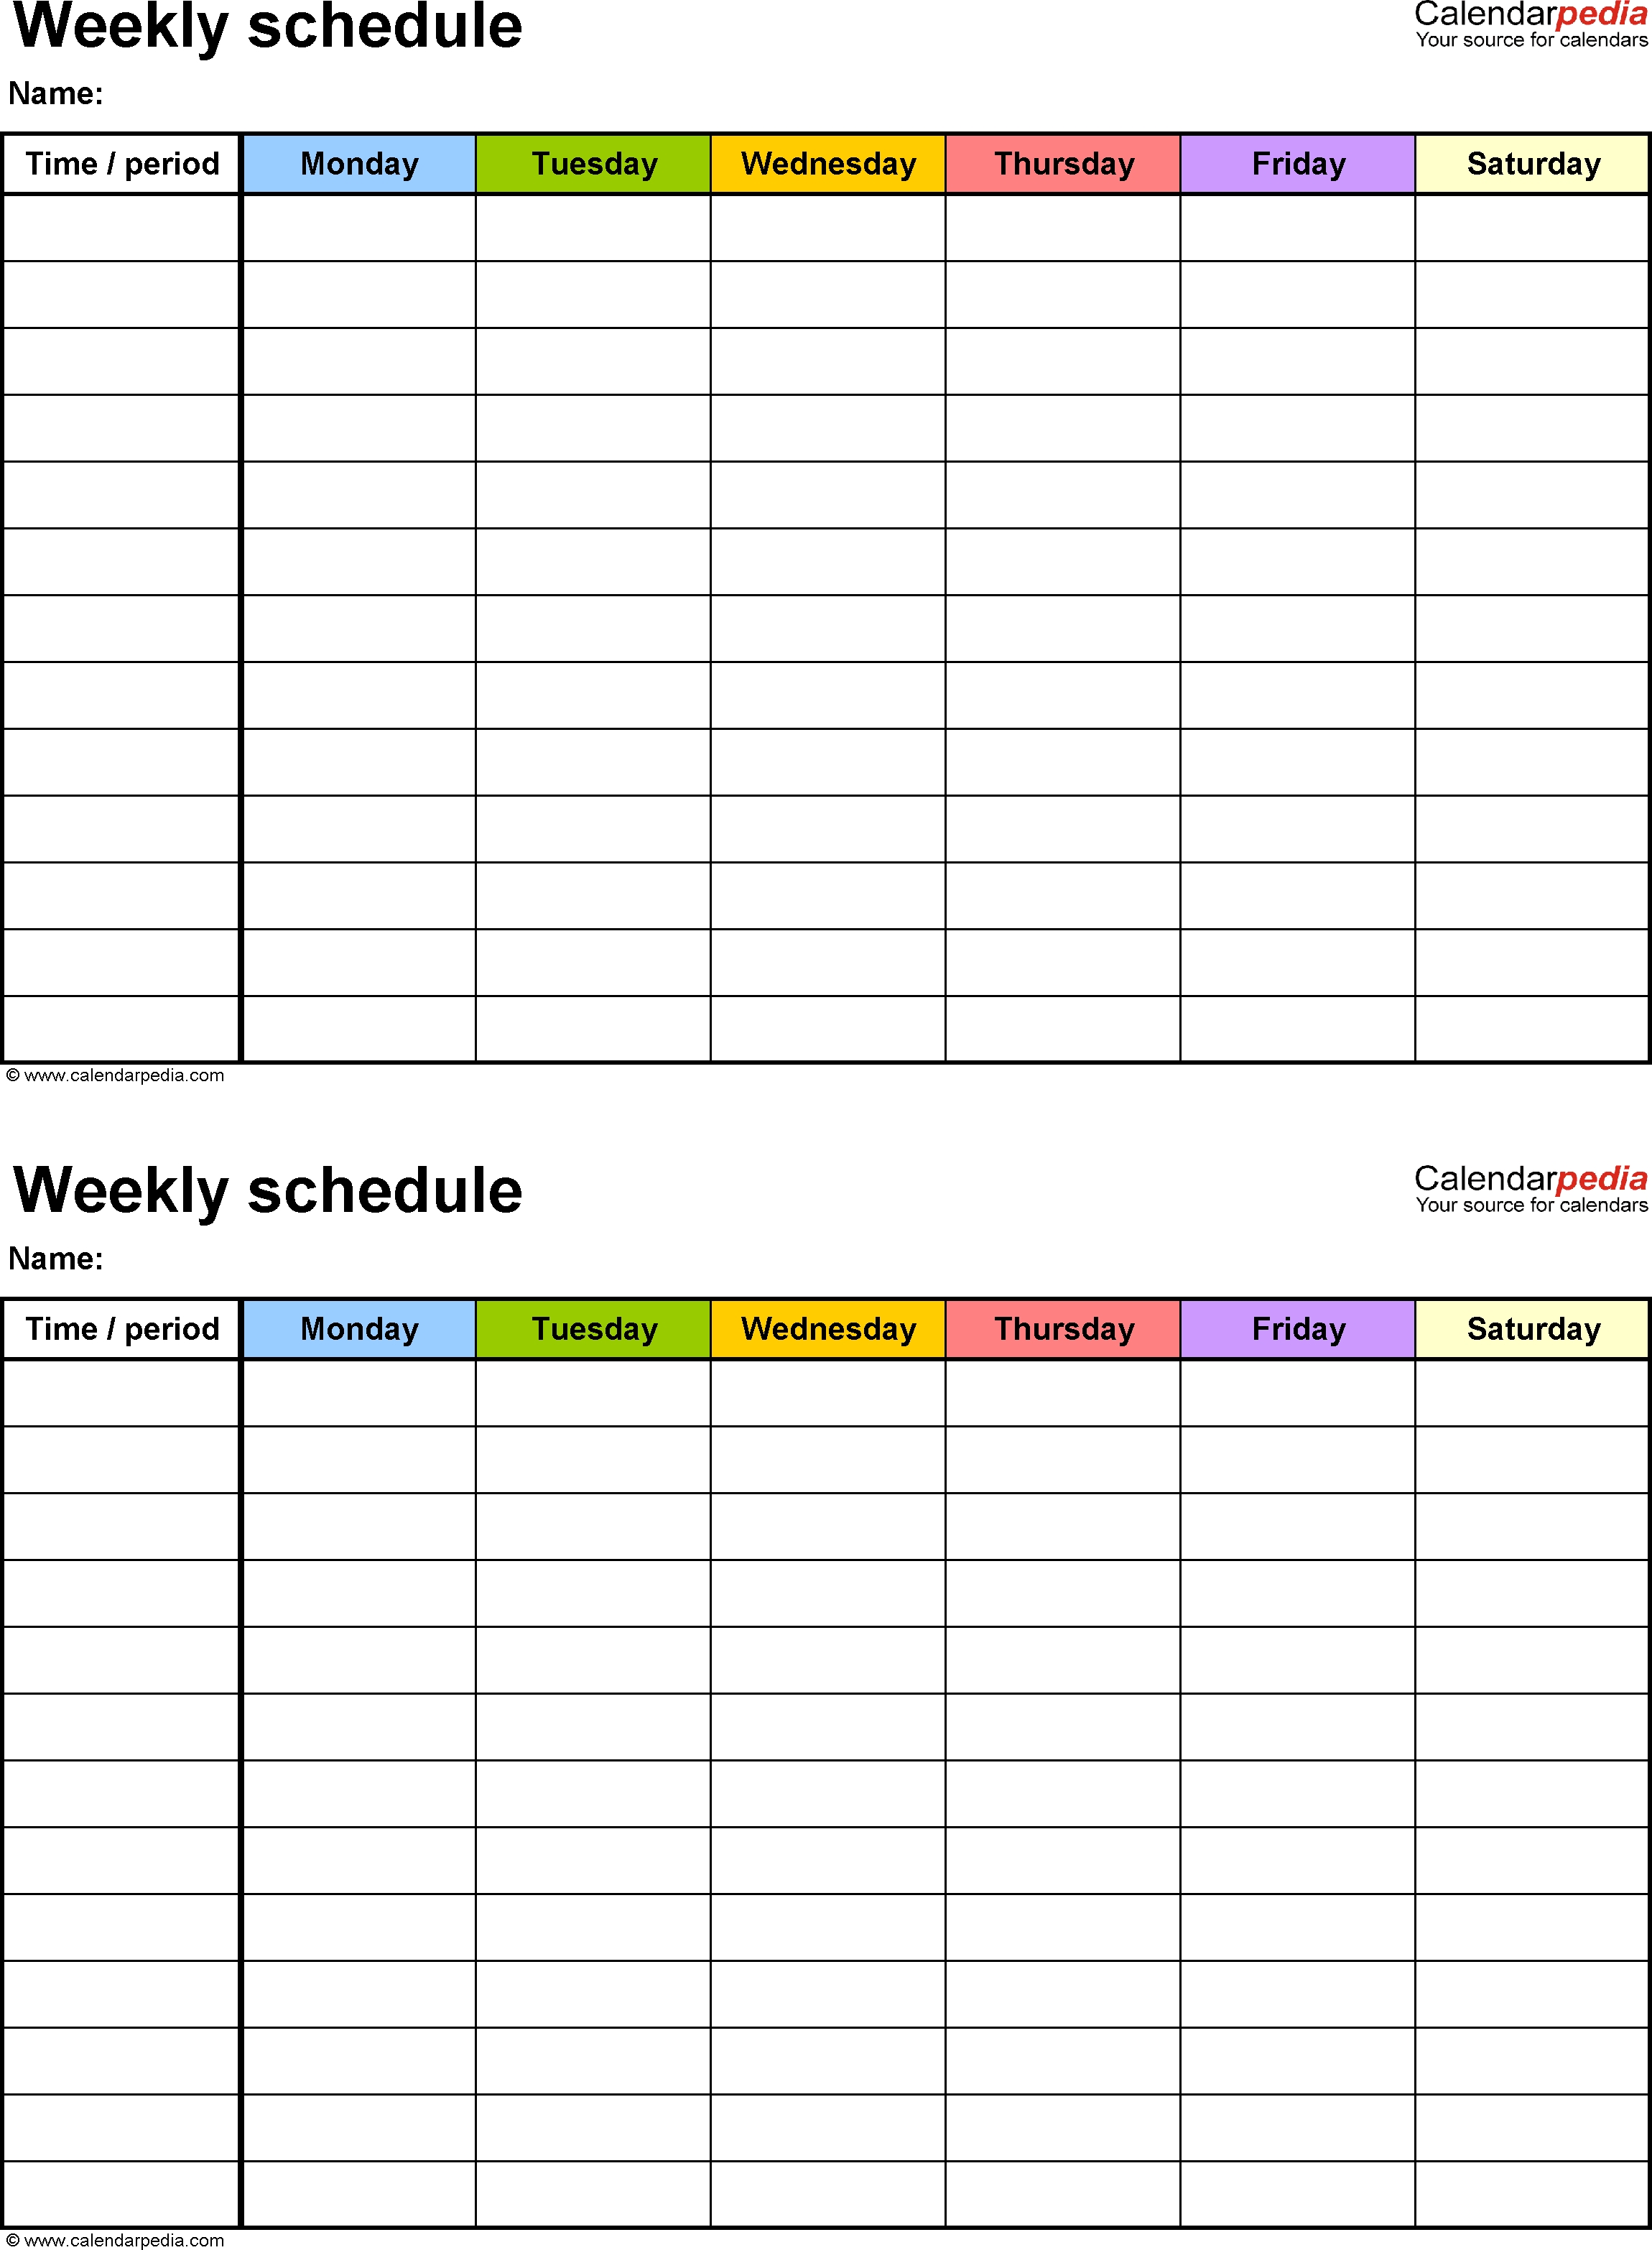 Free Weekly Schedule Templates For Word - 18 Templates Microsoft Word Weekly Calendar Template